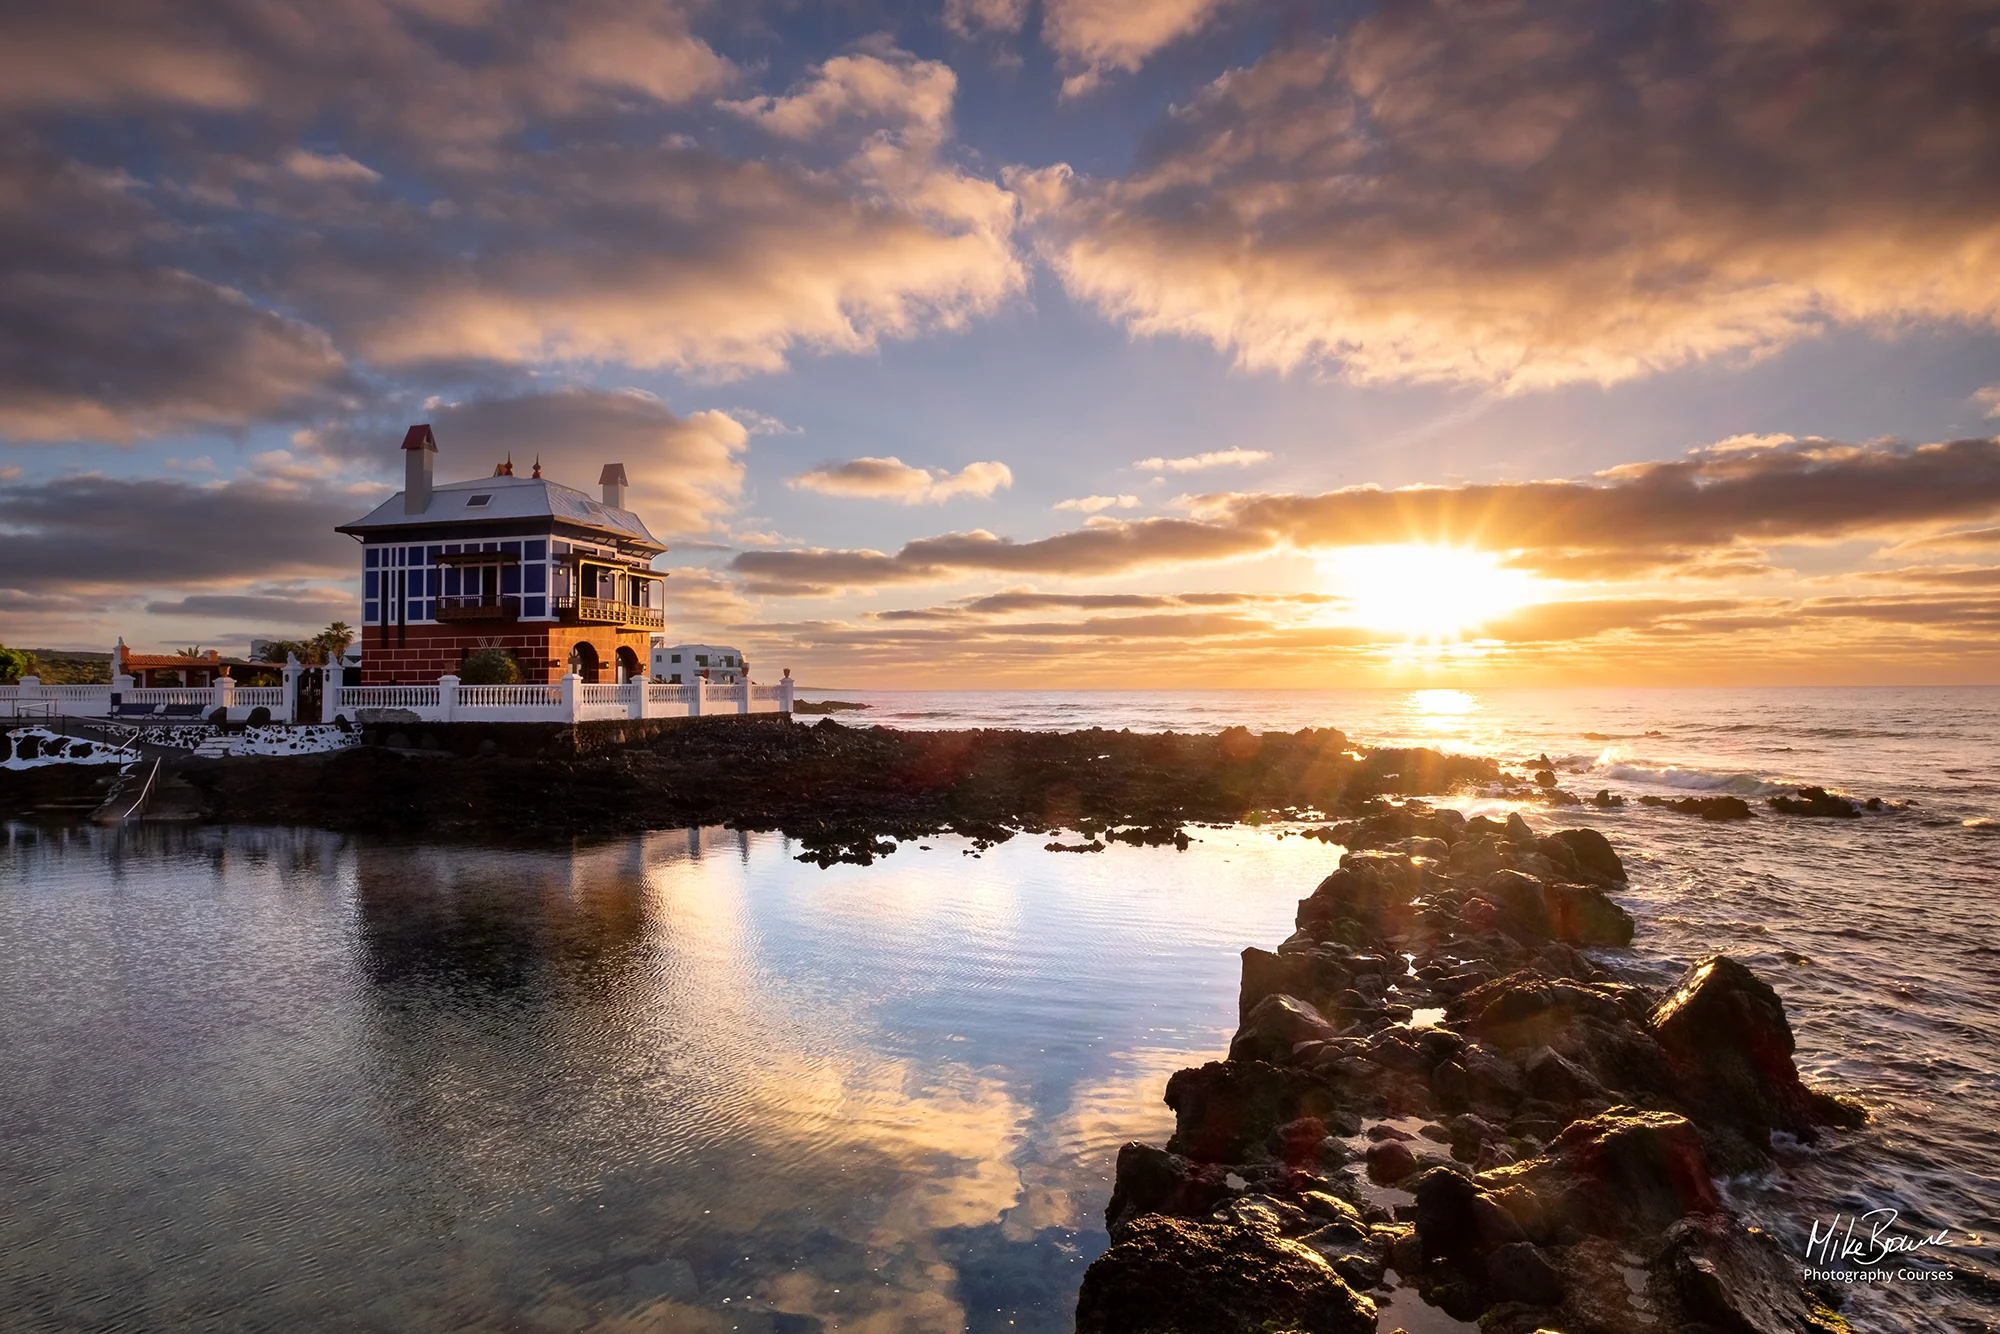 Red brick house by a tidal pool at sunrise